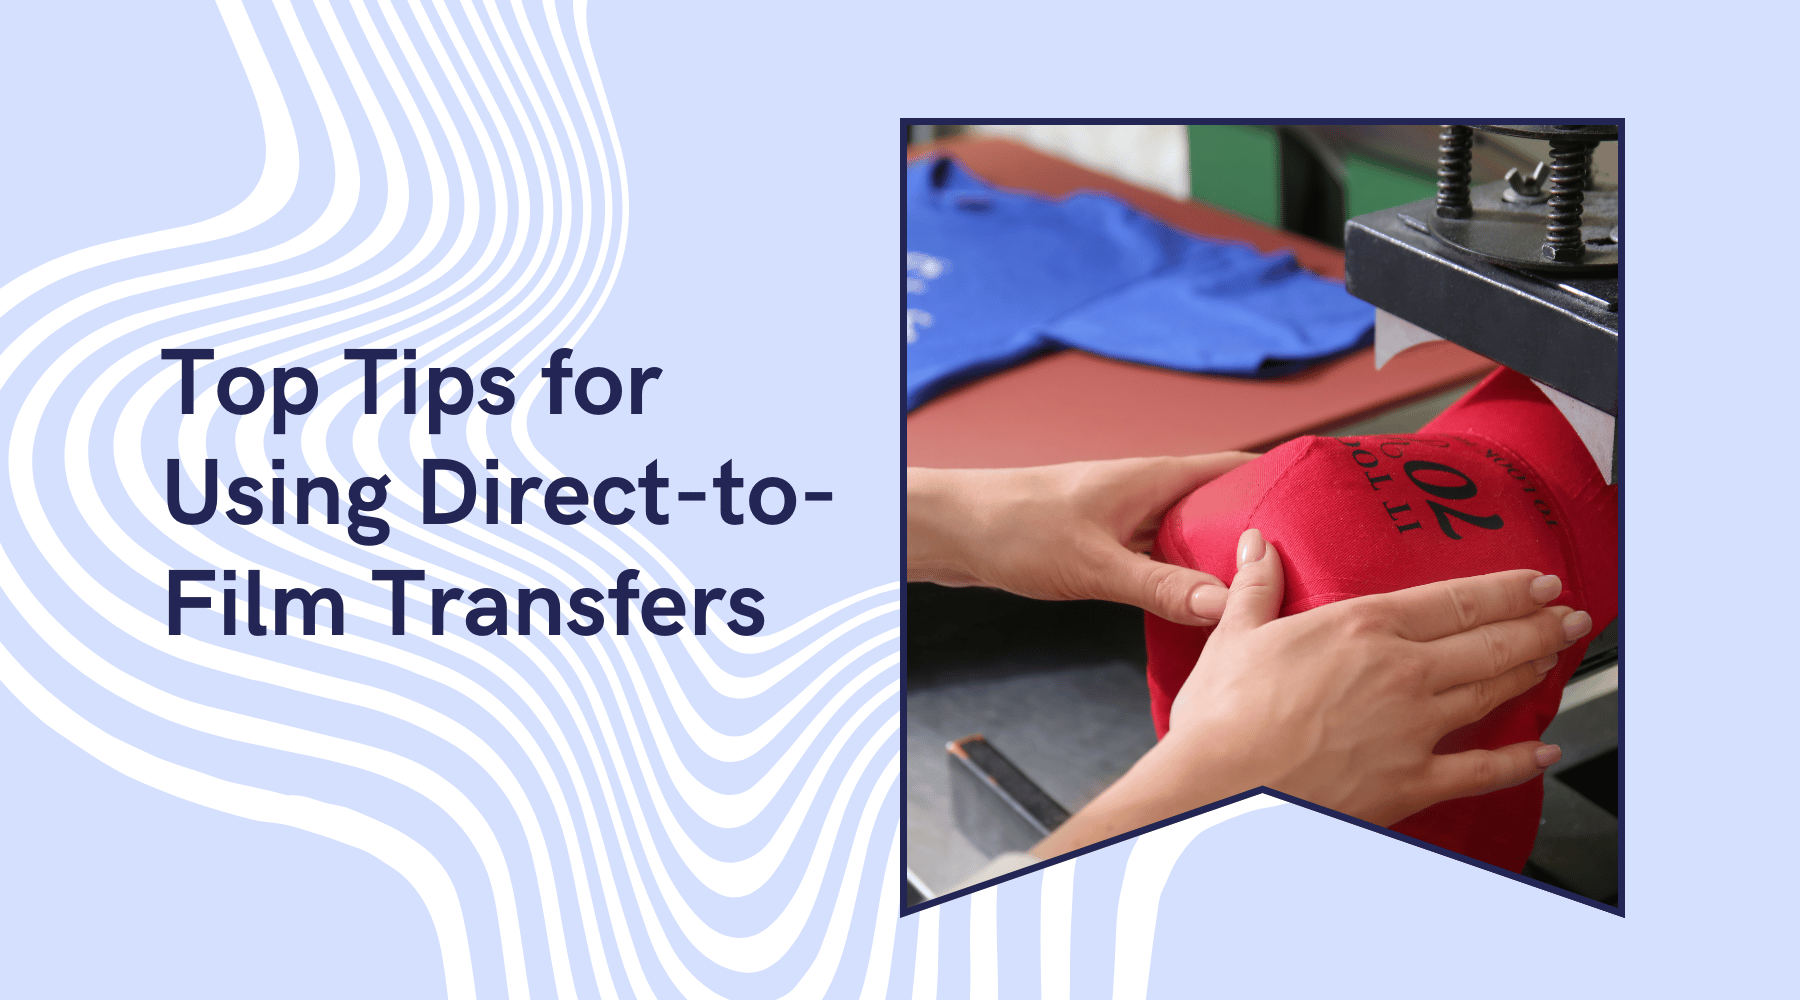 Top Tips for Using Direct-to-Film Transfers